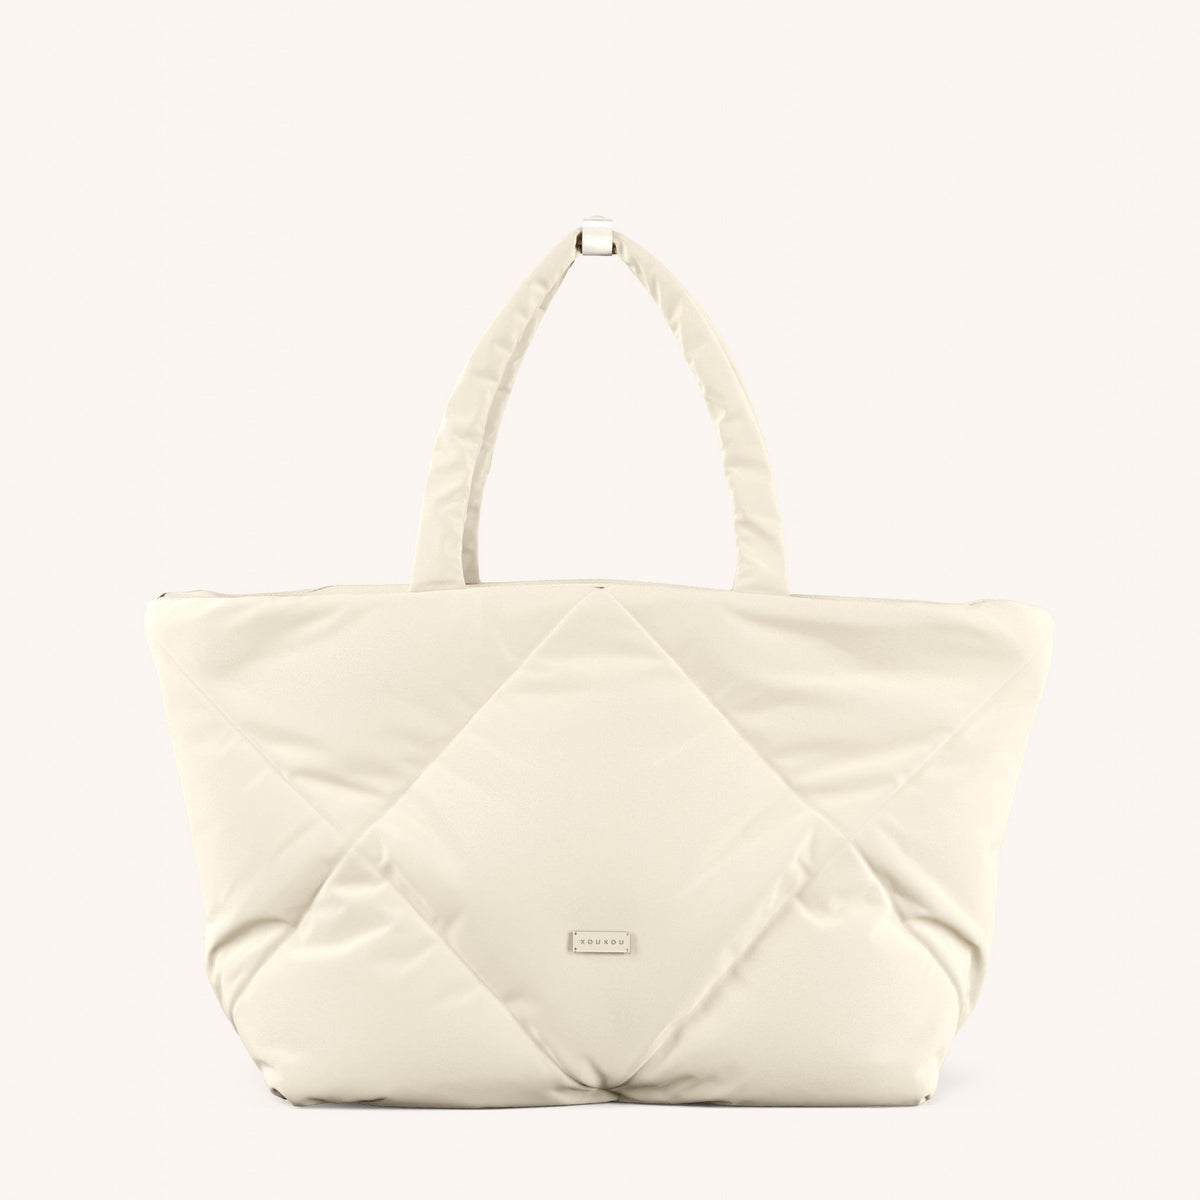 Padded Tote in Chalk Total View | XOUXOU